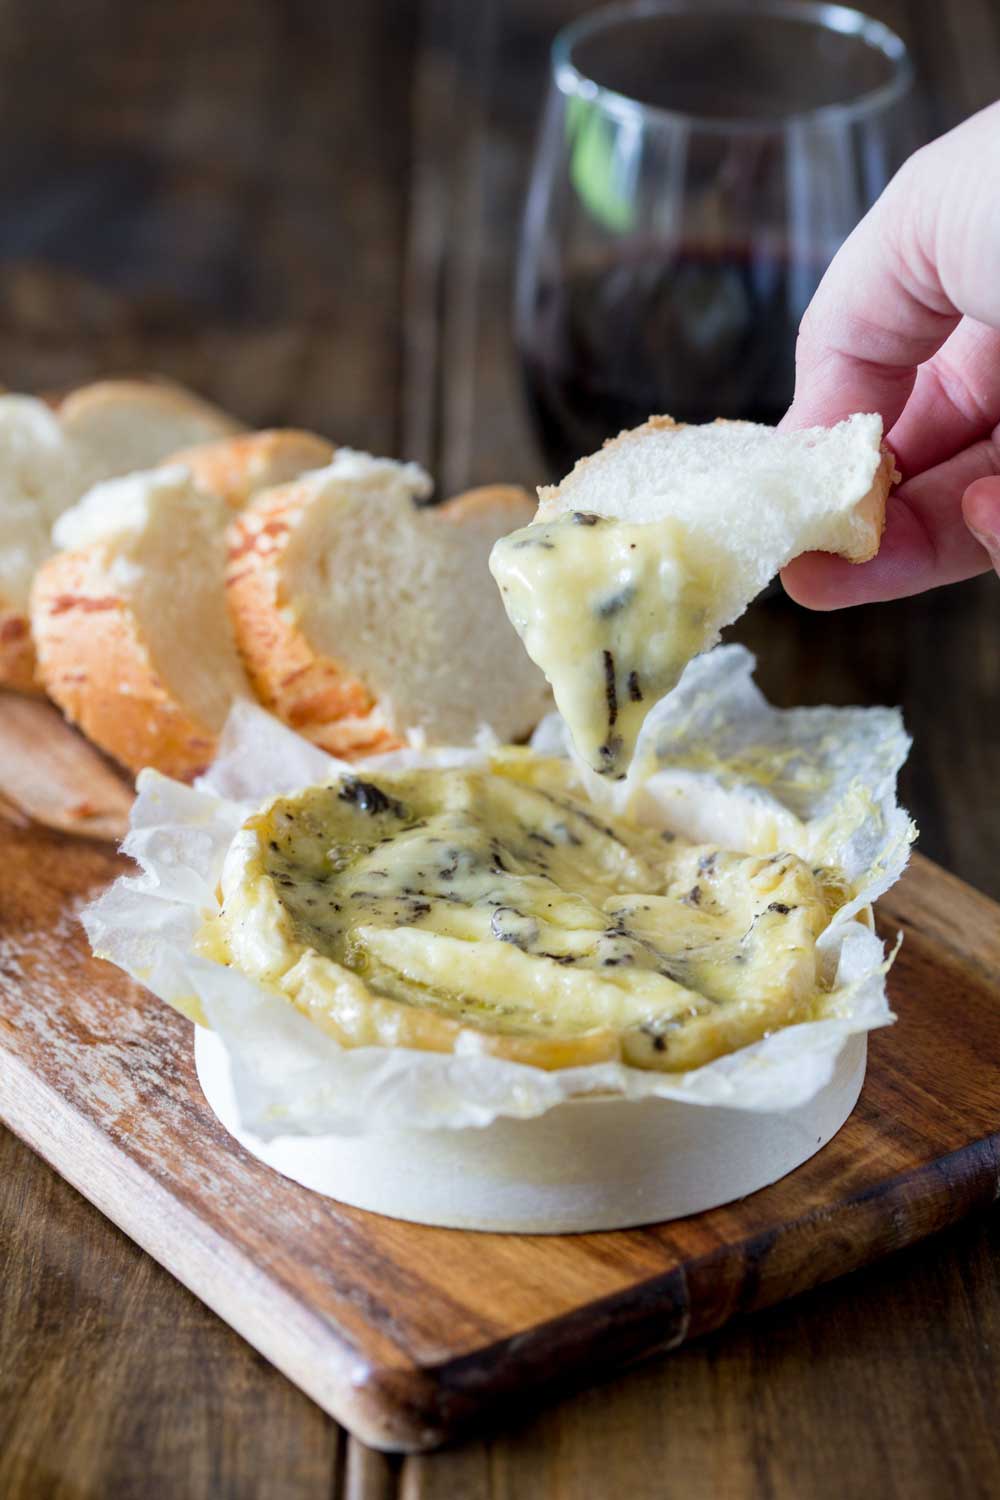 Creamy brie, enhanced with the earthy delicious flavours of black truffle all baked to oozing delicious perfection! Seriously this Baked Black Truffle Stuffed Brie is decadence and heaven on a plate!